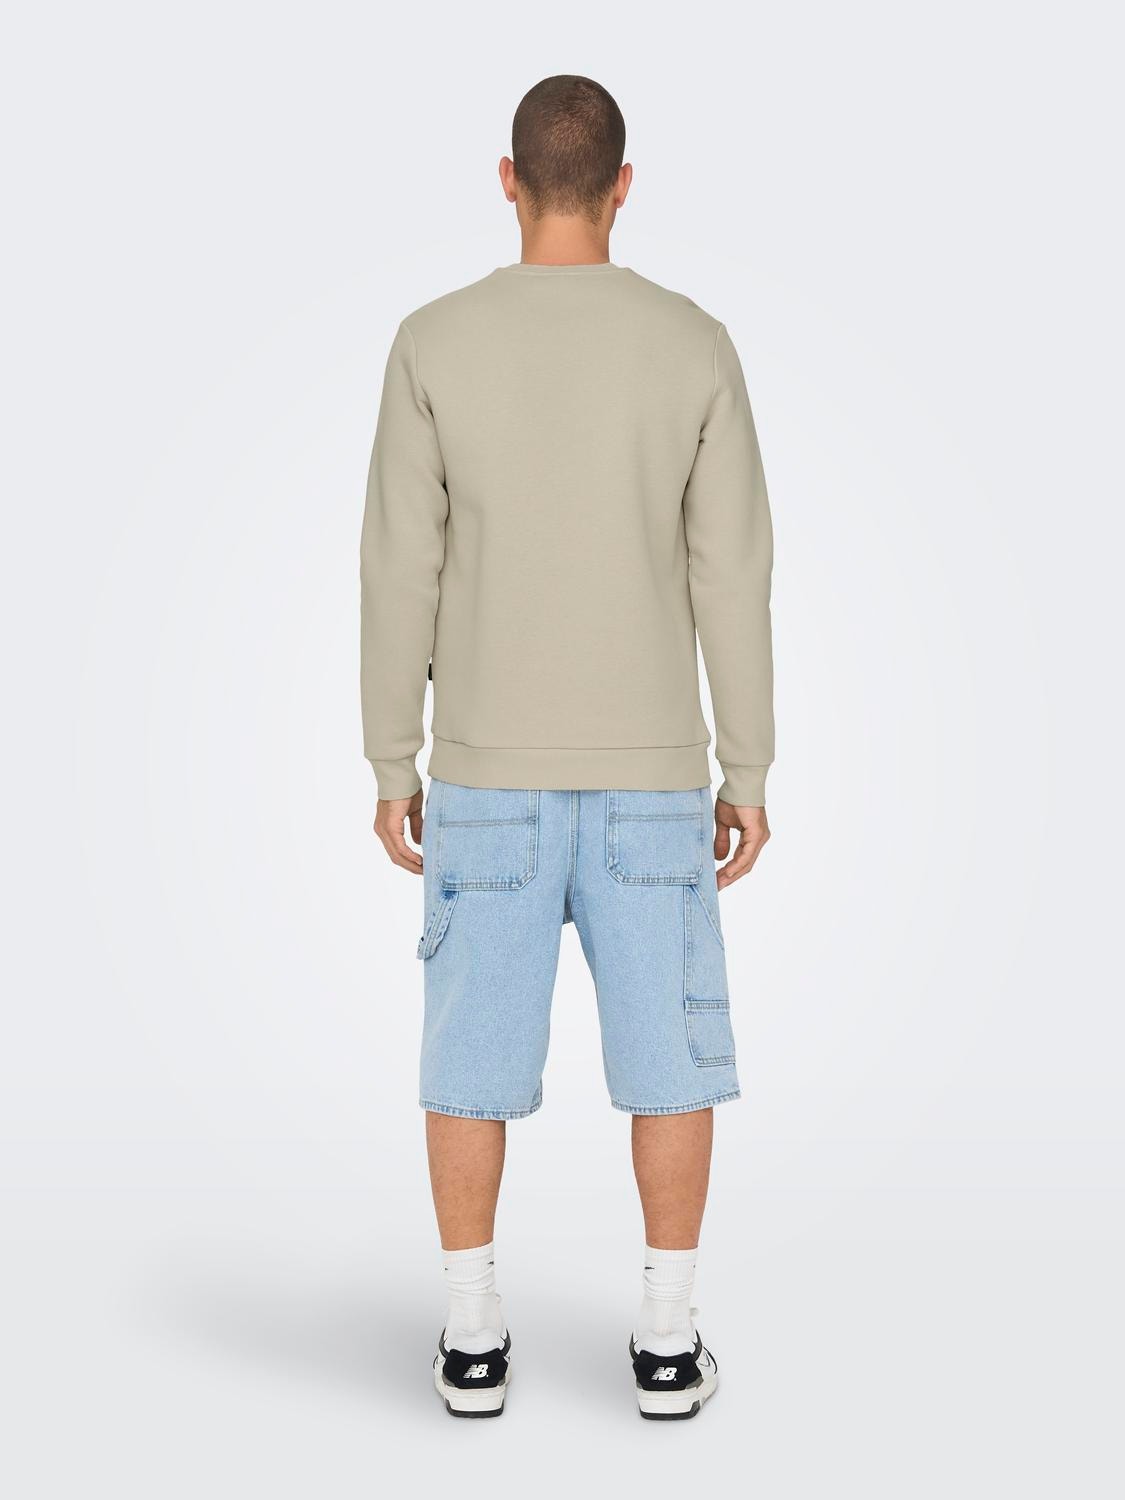 ONLY & SONS Regular Fit Round Neck Sweatshirt -Silver Lining - 22018683